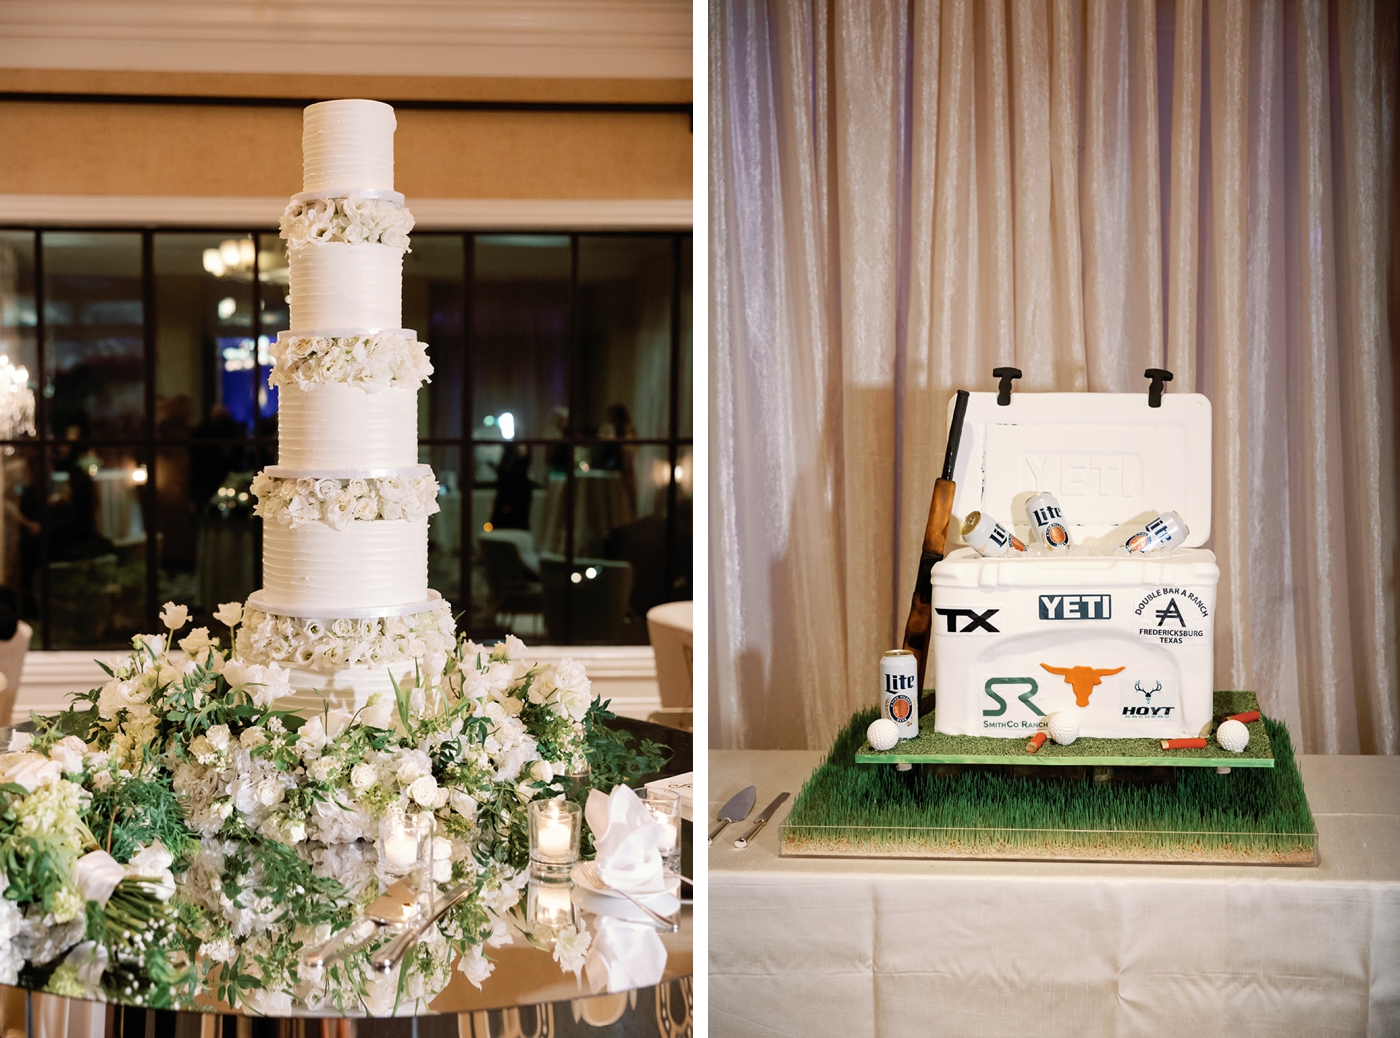 Bride and groom's cakes at a Texas Longhorn wedding in Austin